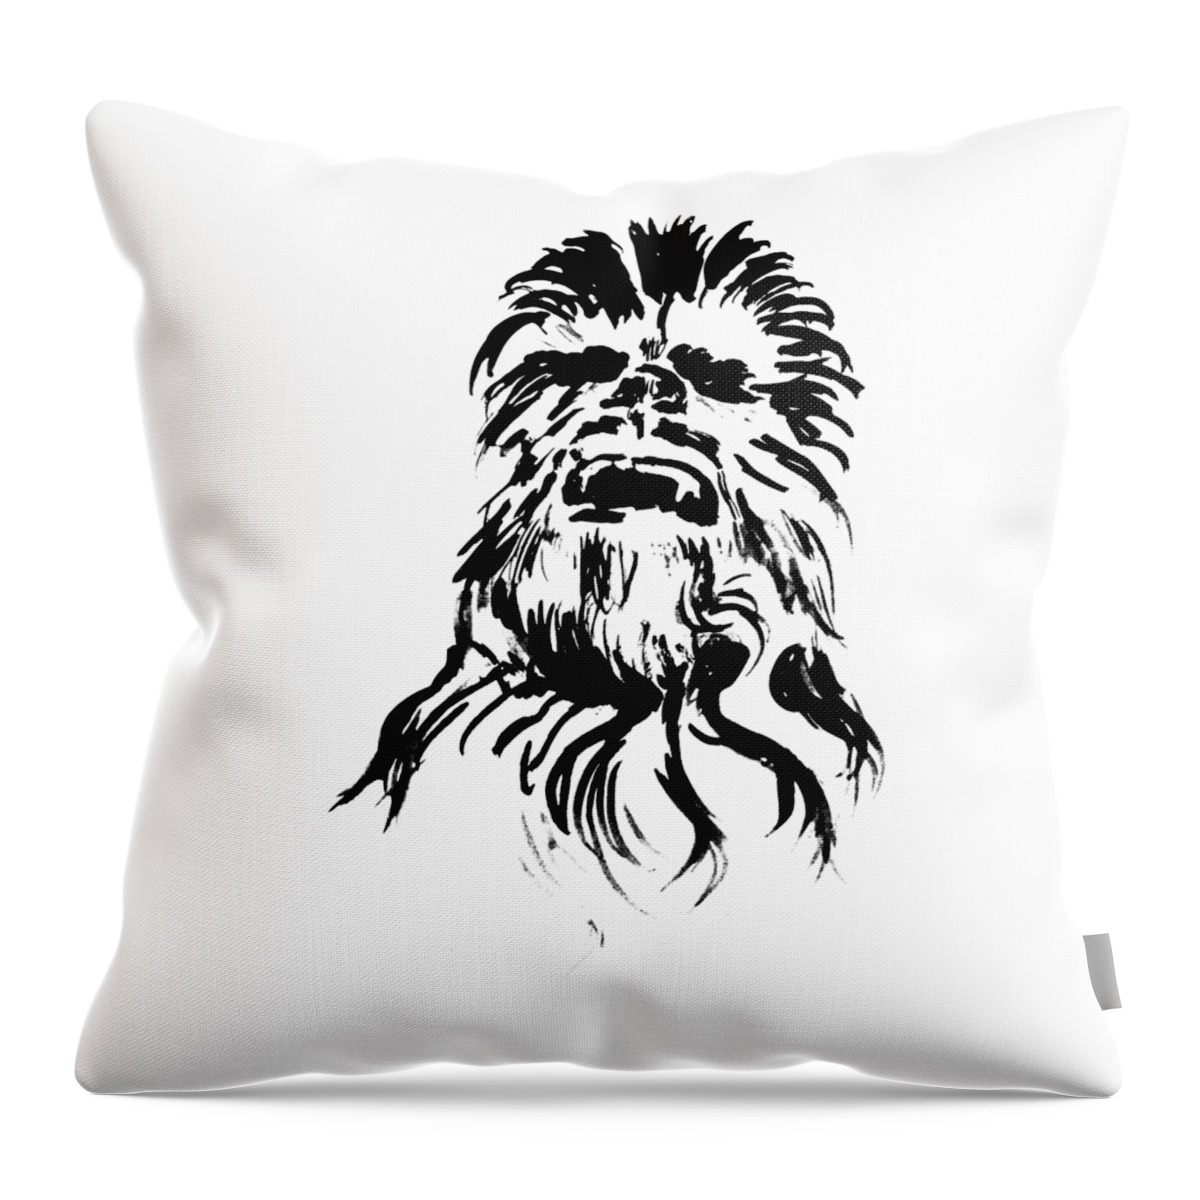 Chewbacca Throw Pillow featuring the painting Chewbacca by Pechane Sumie